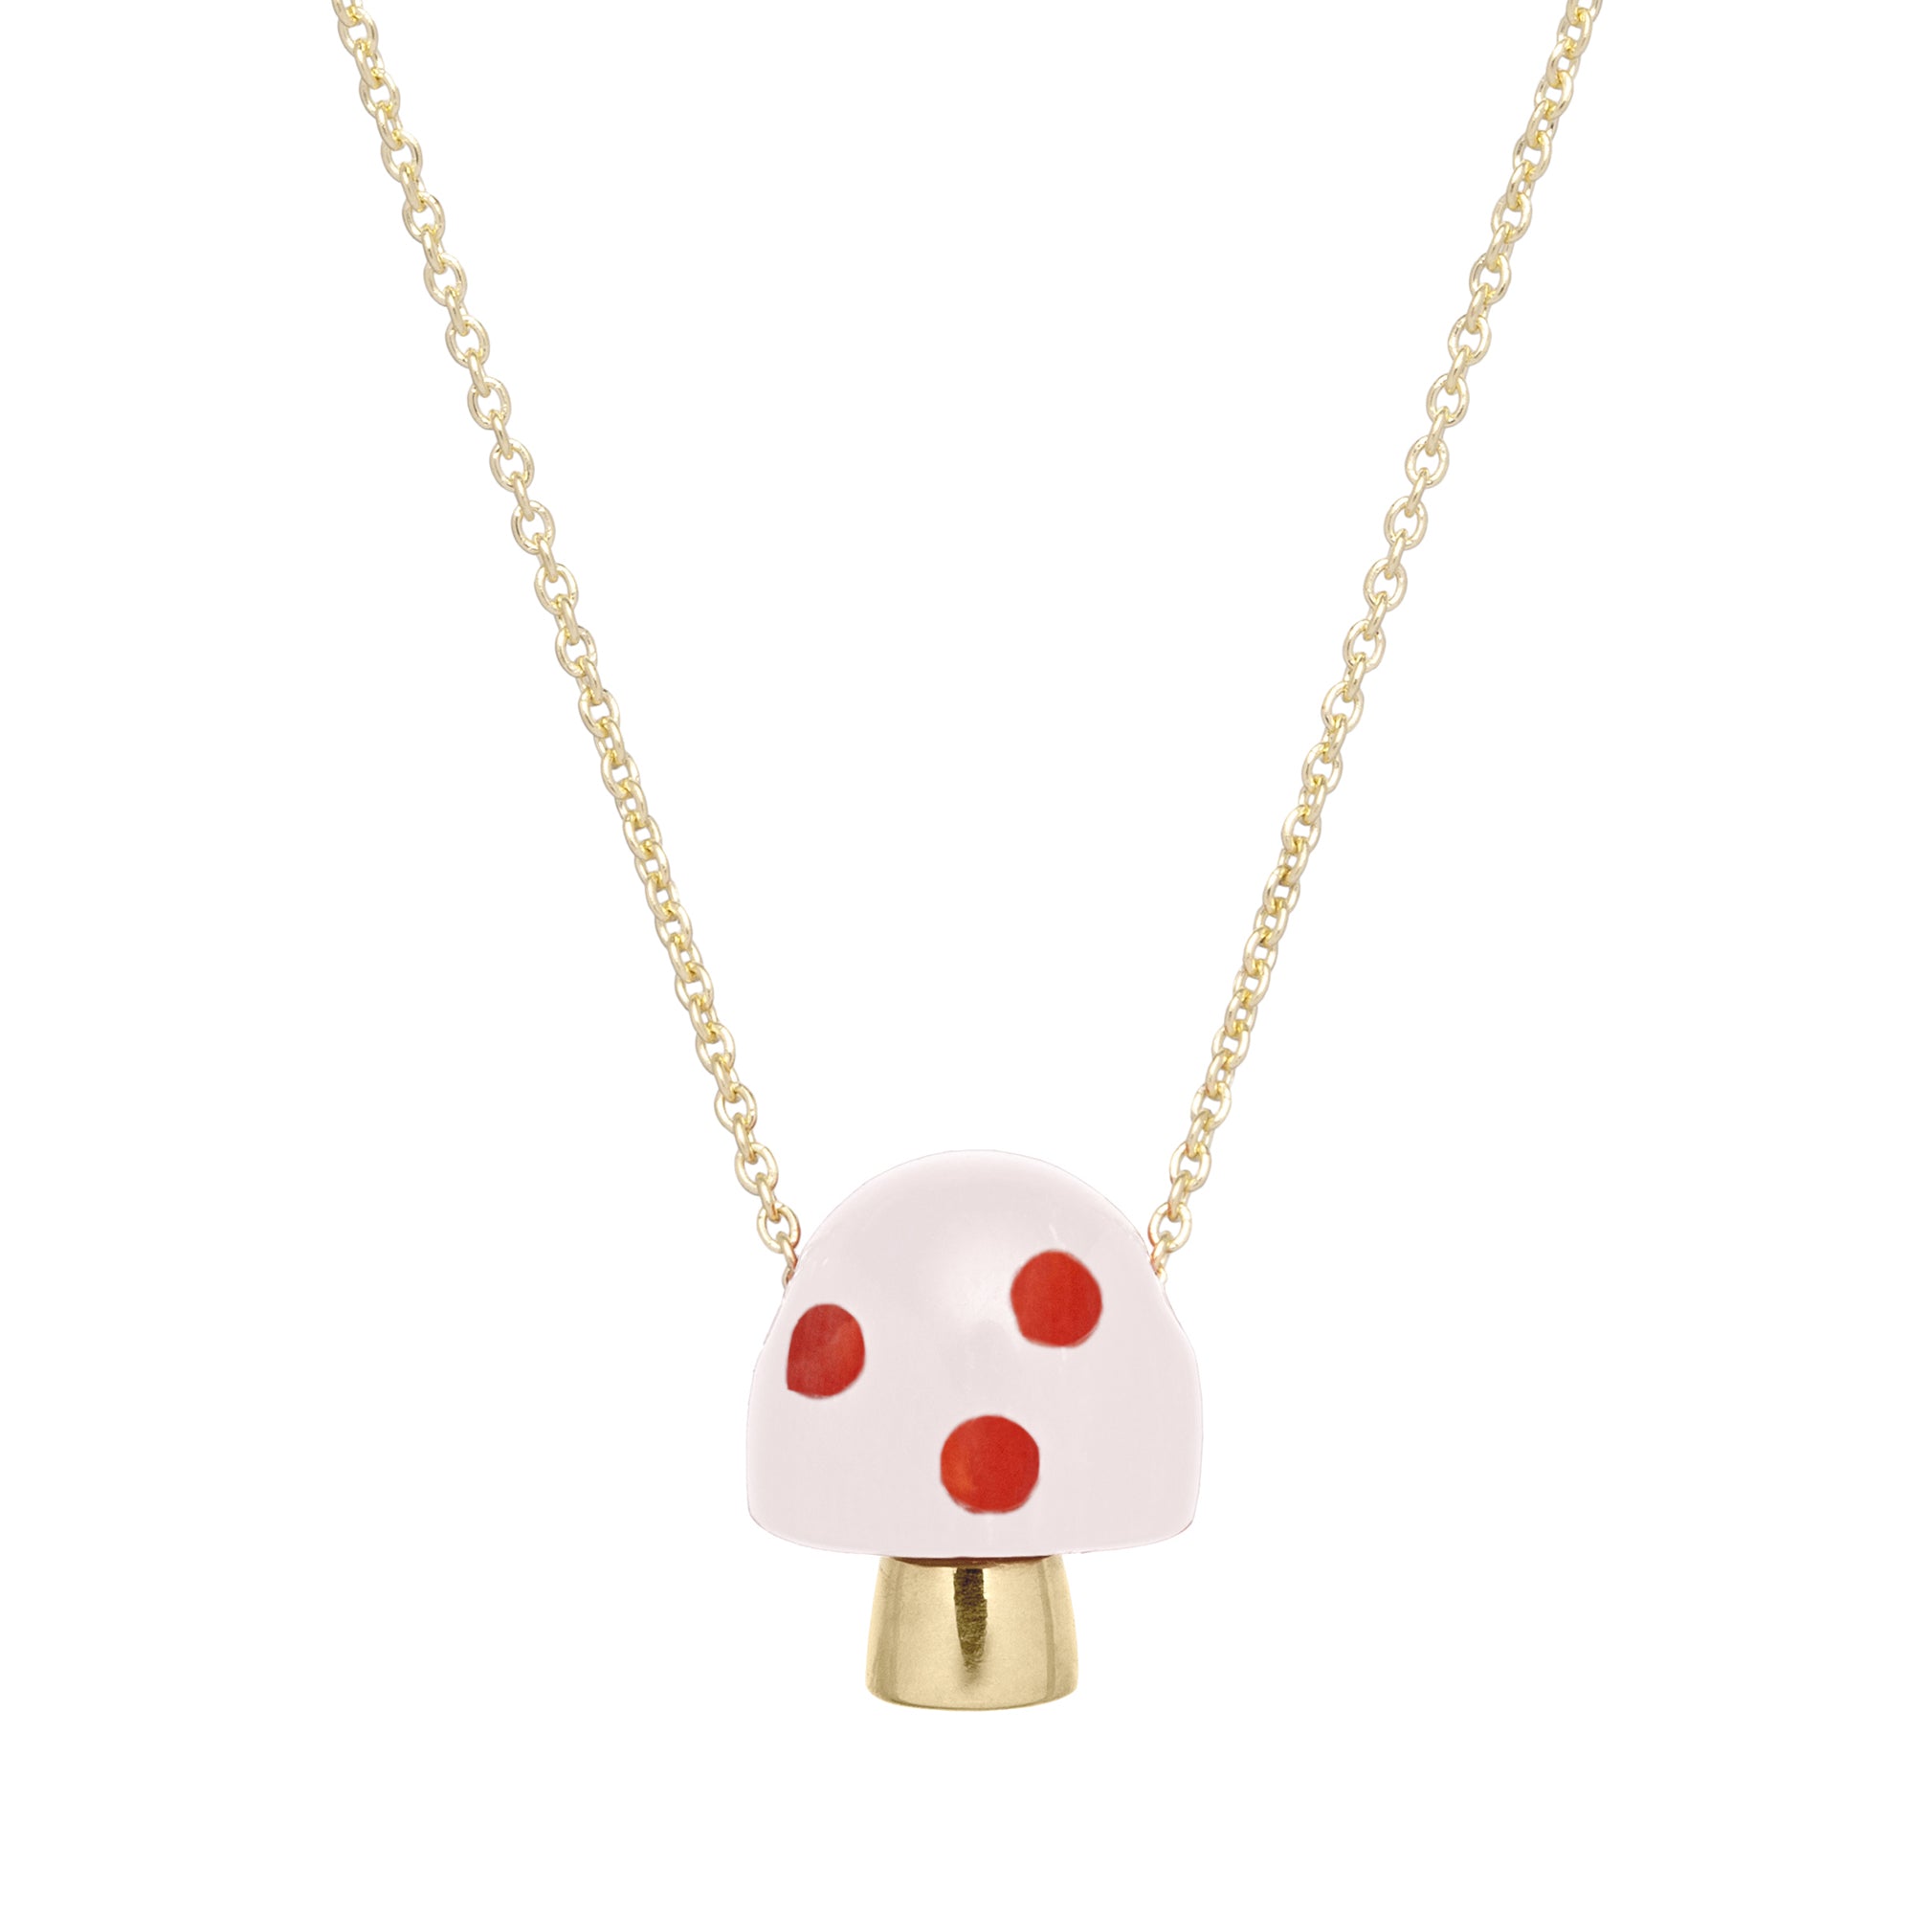 Buy 14k Solid Gold Mushroom Pendant on 18 Solid Gold Chain. Online in India  - Etsy